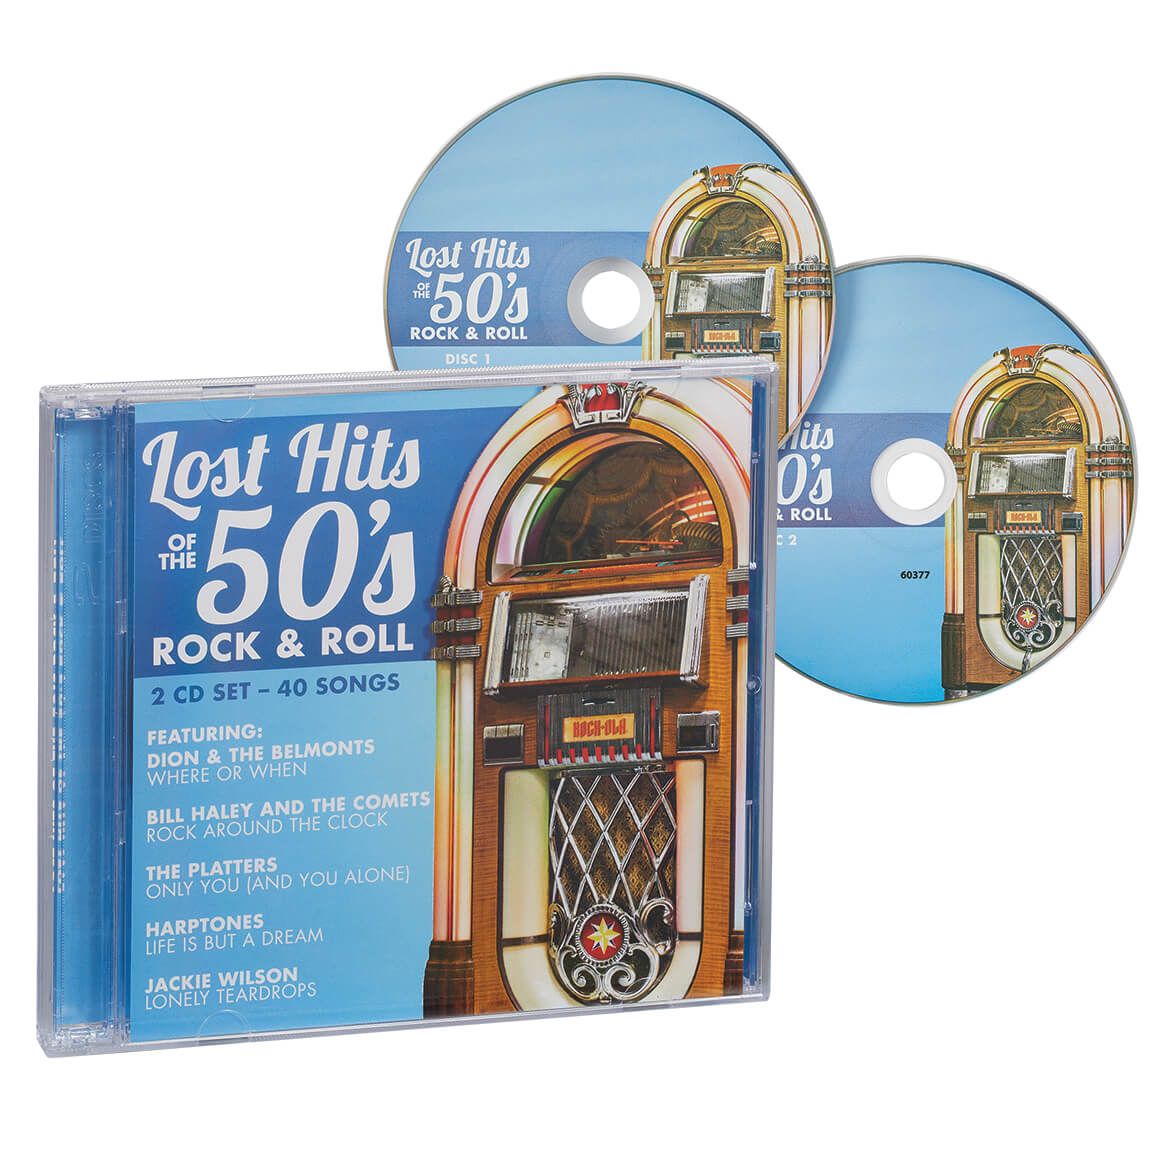 The Very Best Of The Drifters 50 Great Songs 2 CD Set Up on the